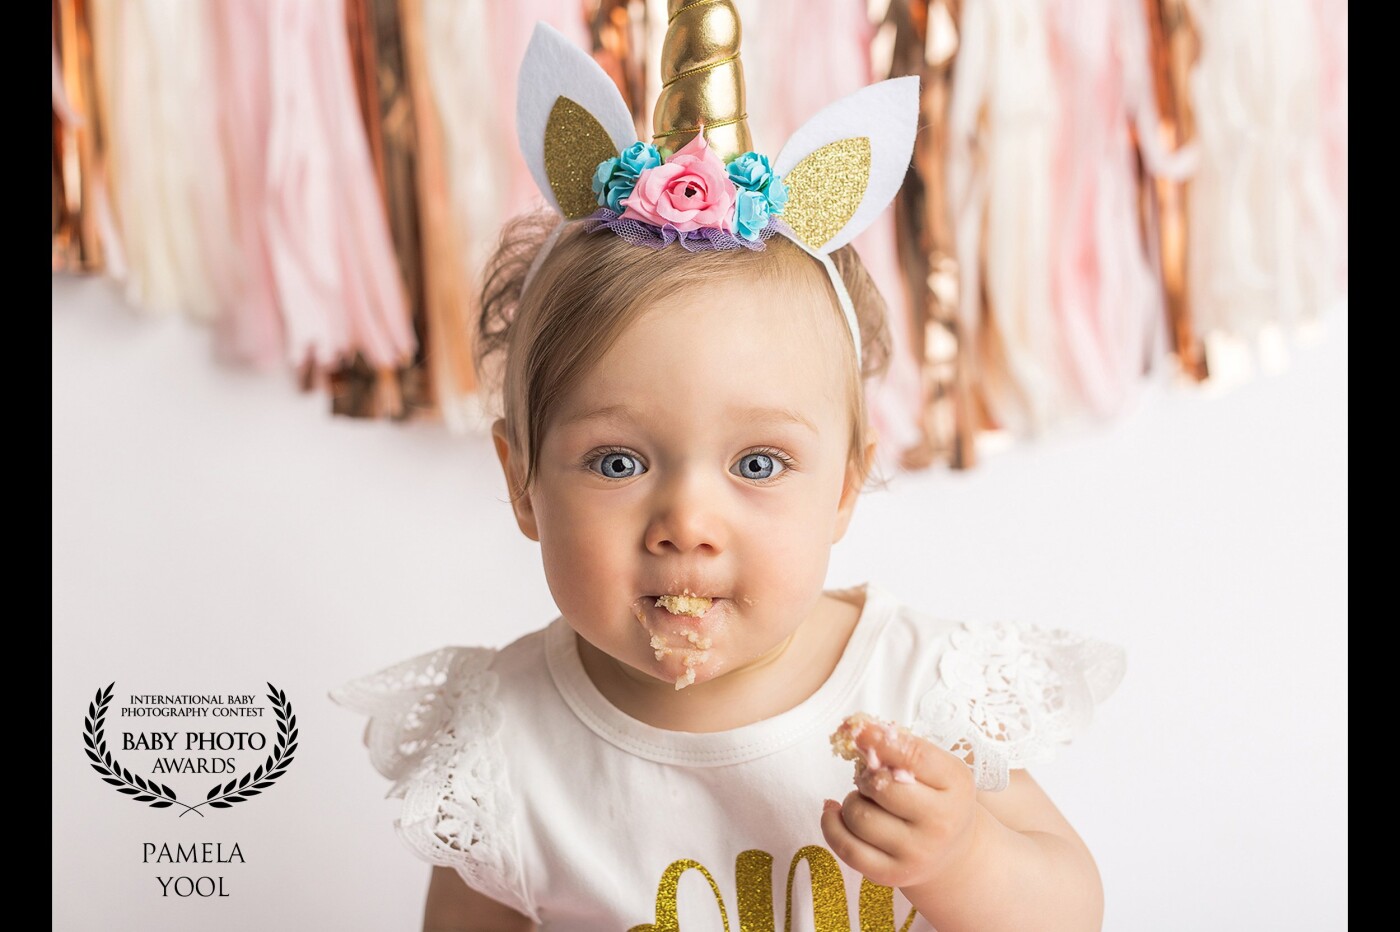 What better way to celebrate turning ONE, than to do a Unicorn Theme Cake Smash Session! Here are some adorable first birthday portraits of Baby R, who recently celebrated with a stylized cake smash photoshoot at my Toronto studio. I just adore Baby R in all of these photos…her entire gallery makes me smile. She was a little shy at first, but quickly warmed up once we brought out the cake and smiled for the rest of the session. Every detail was carefully planned and coordinated - the gold unicorn horn headband, rosette covered pastel pink cake matched with pink and gold tassel garland. What a fun cake smash session it was! 